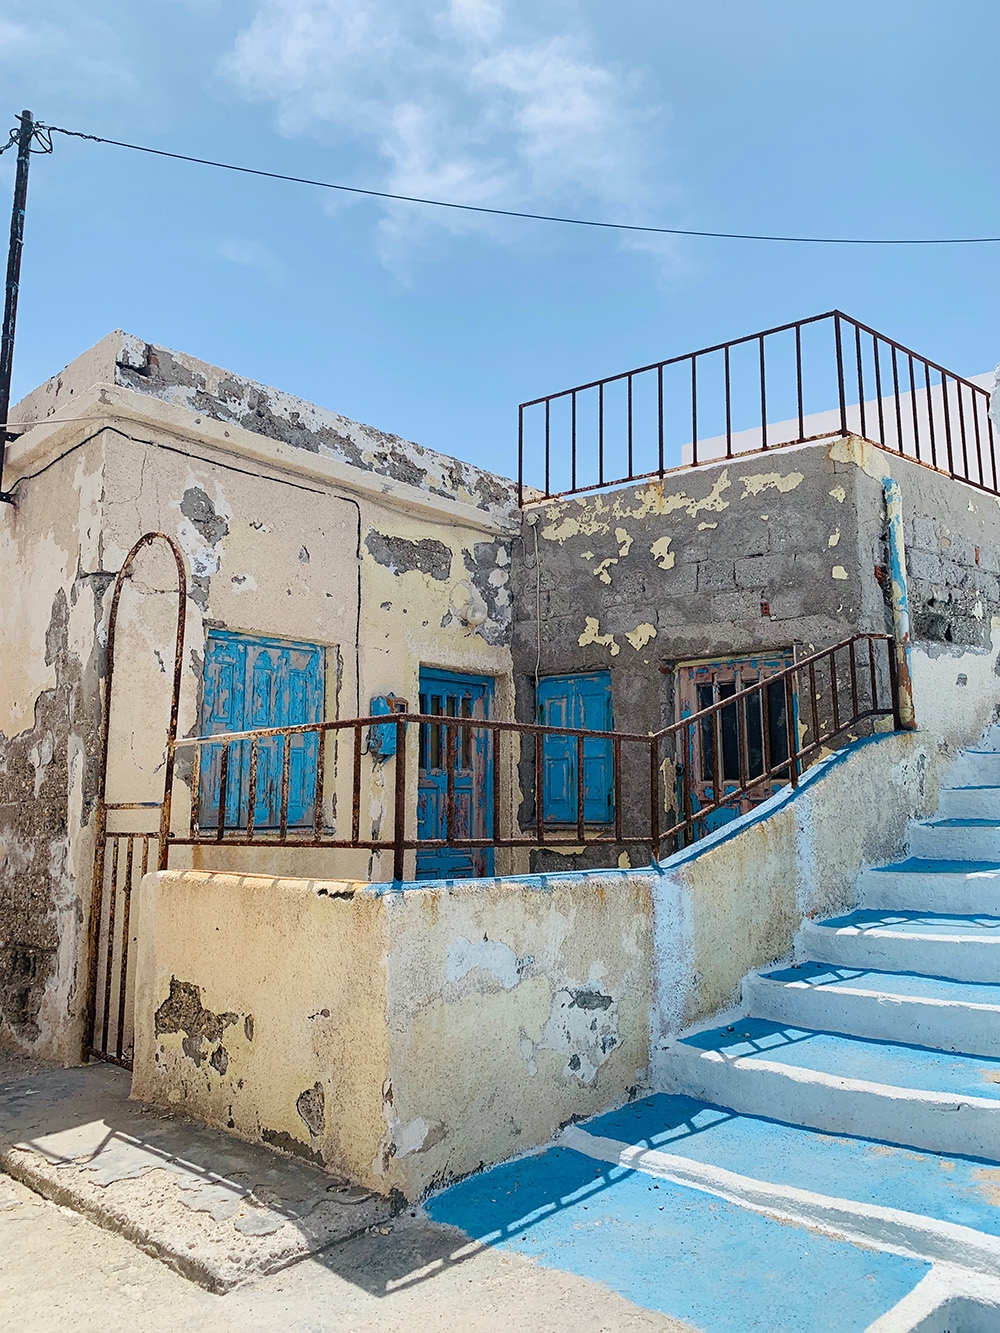 An old Greek building with peeling cream and blue paint on the walls, doors and railings. A blue staircase ascends to the second level. 